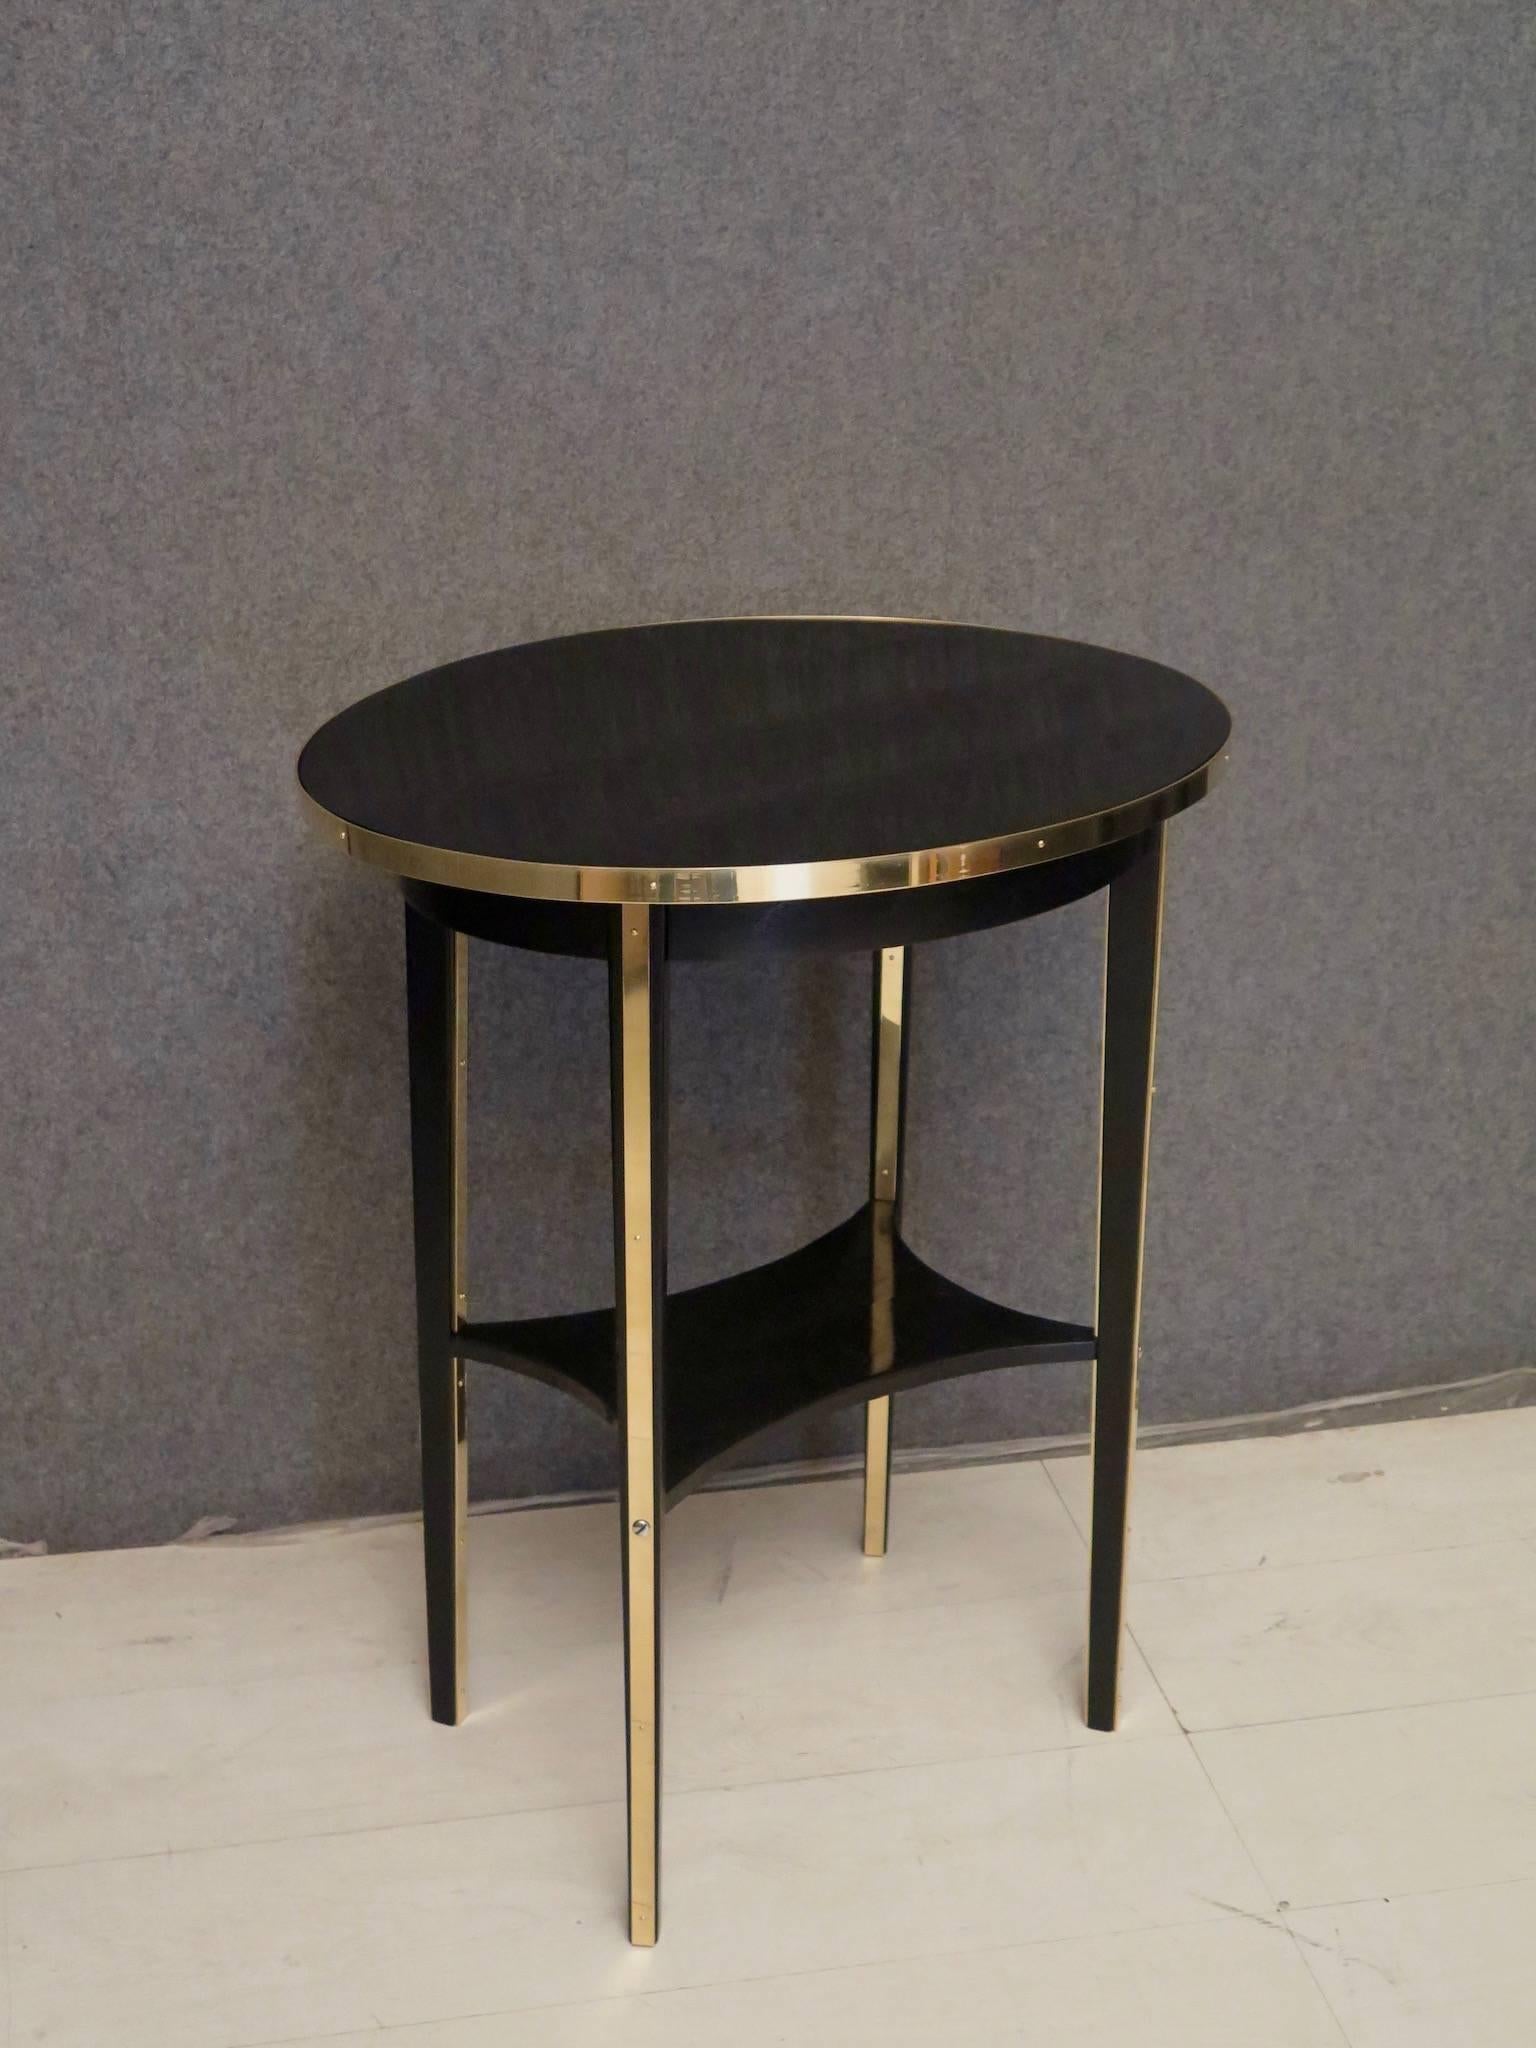 Early 20th Century Thonet Oval Black Shellac and Brass Austrian Art Nouveau Side Table, 1910